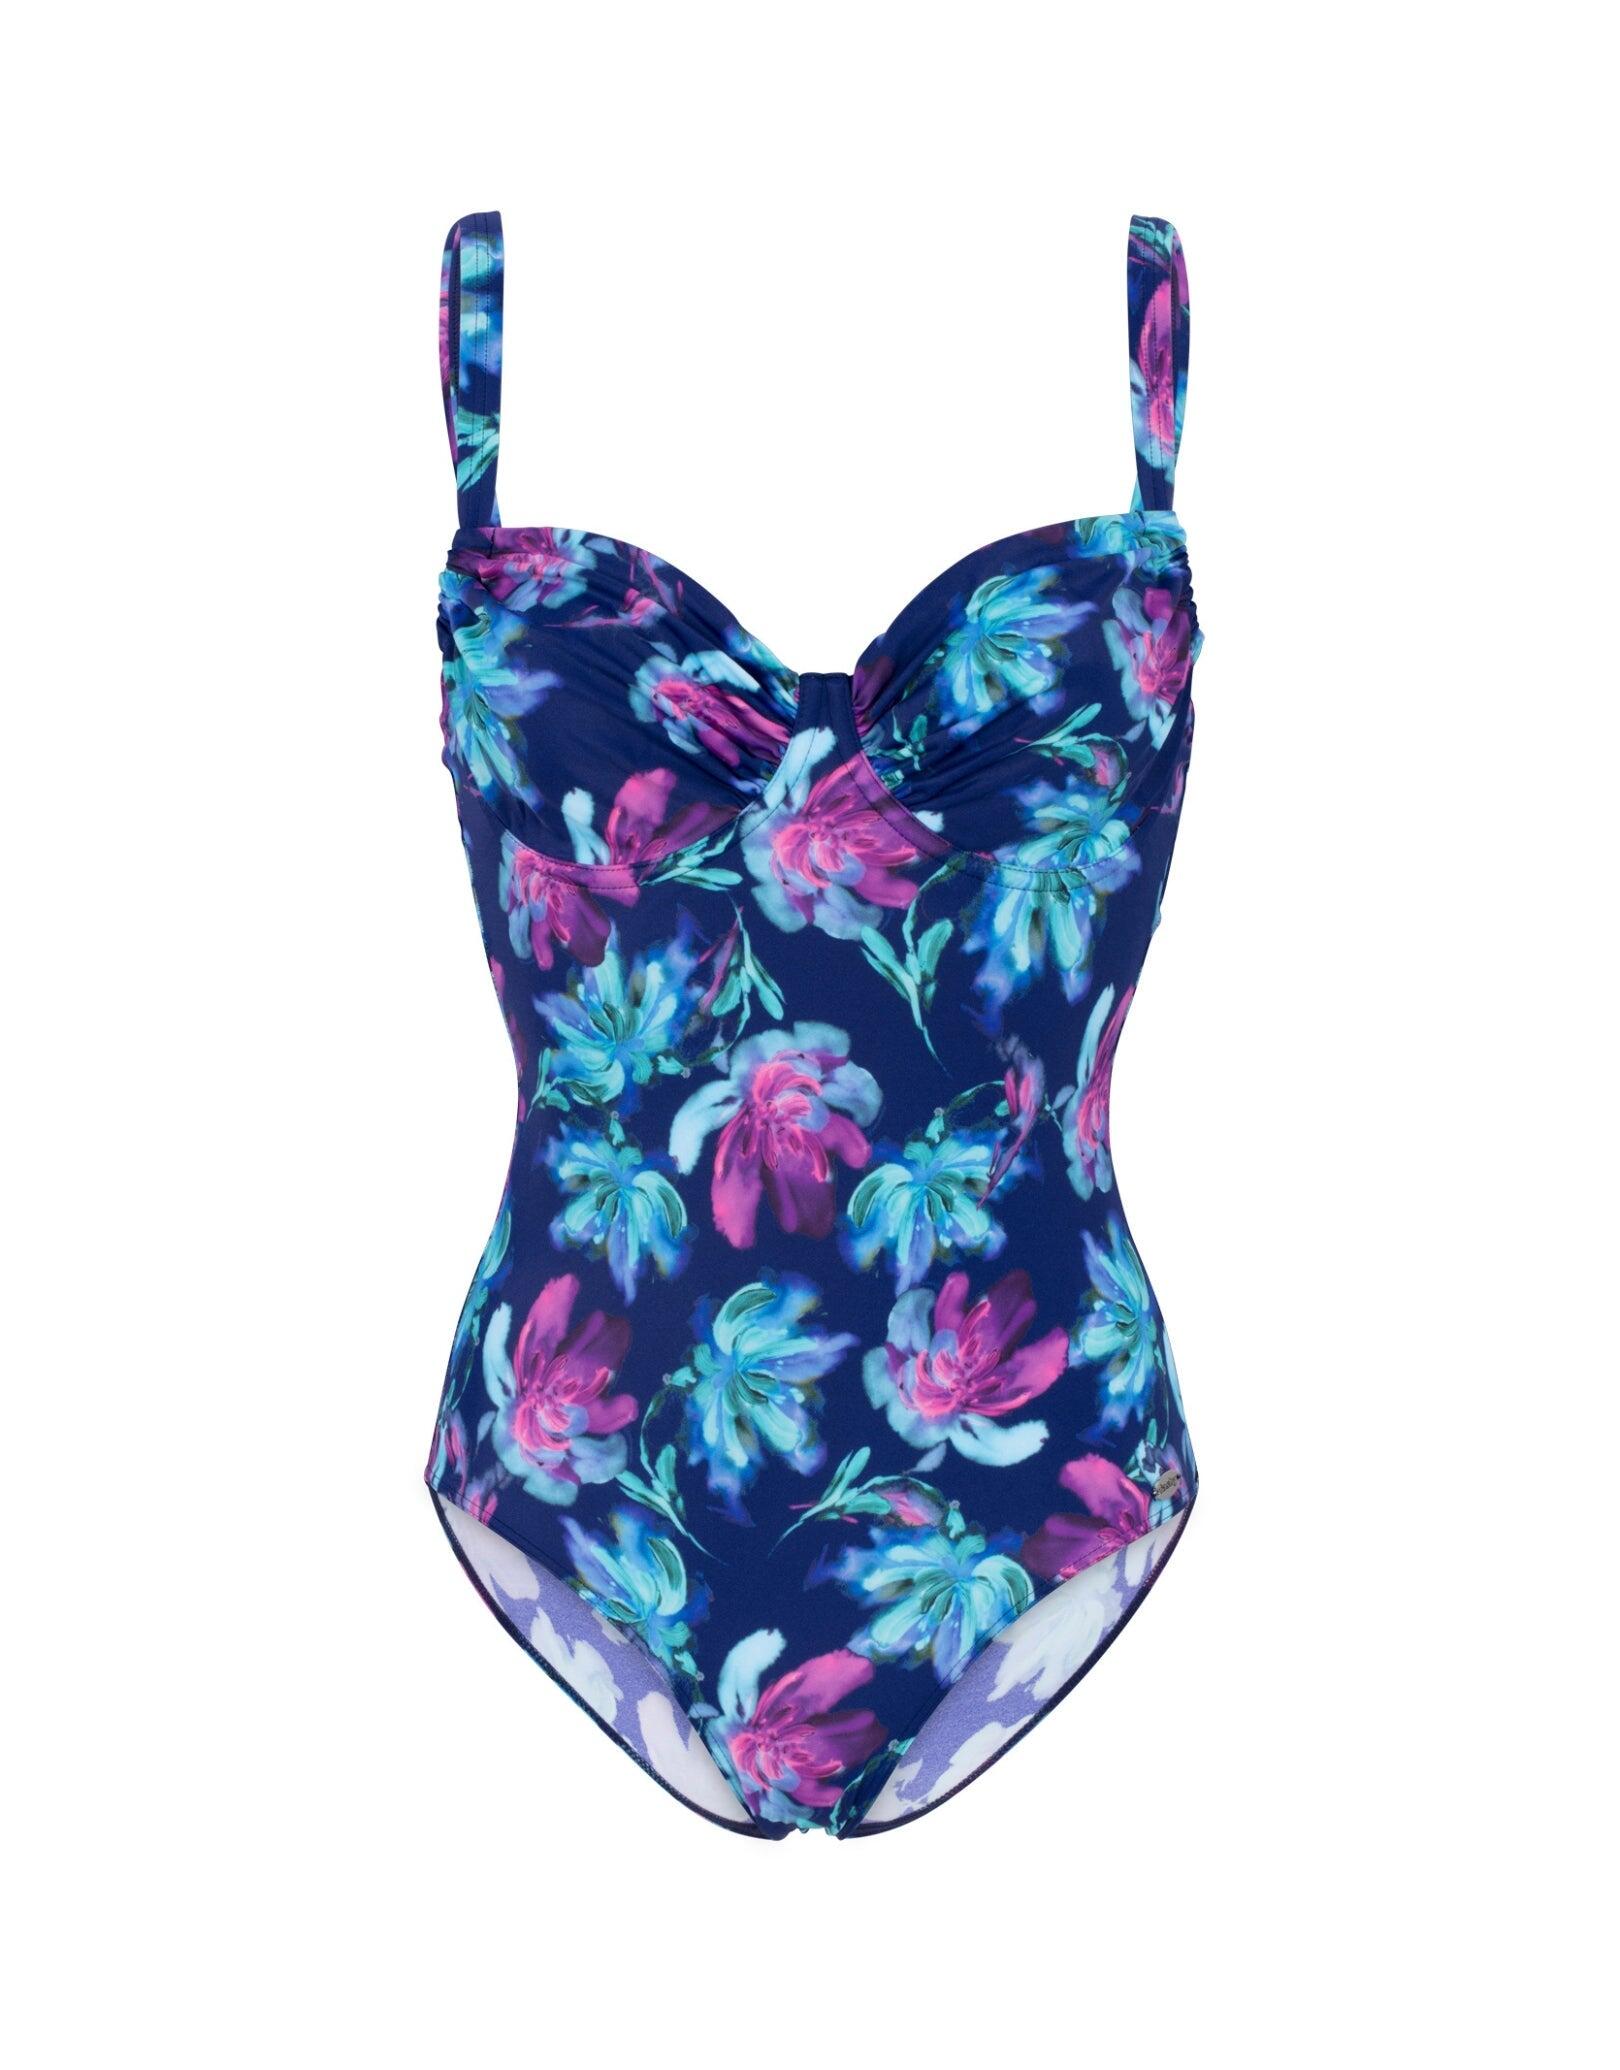 FASHY Fashy Floral Adjustable Swimsuit - Navy/Purple